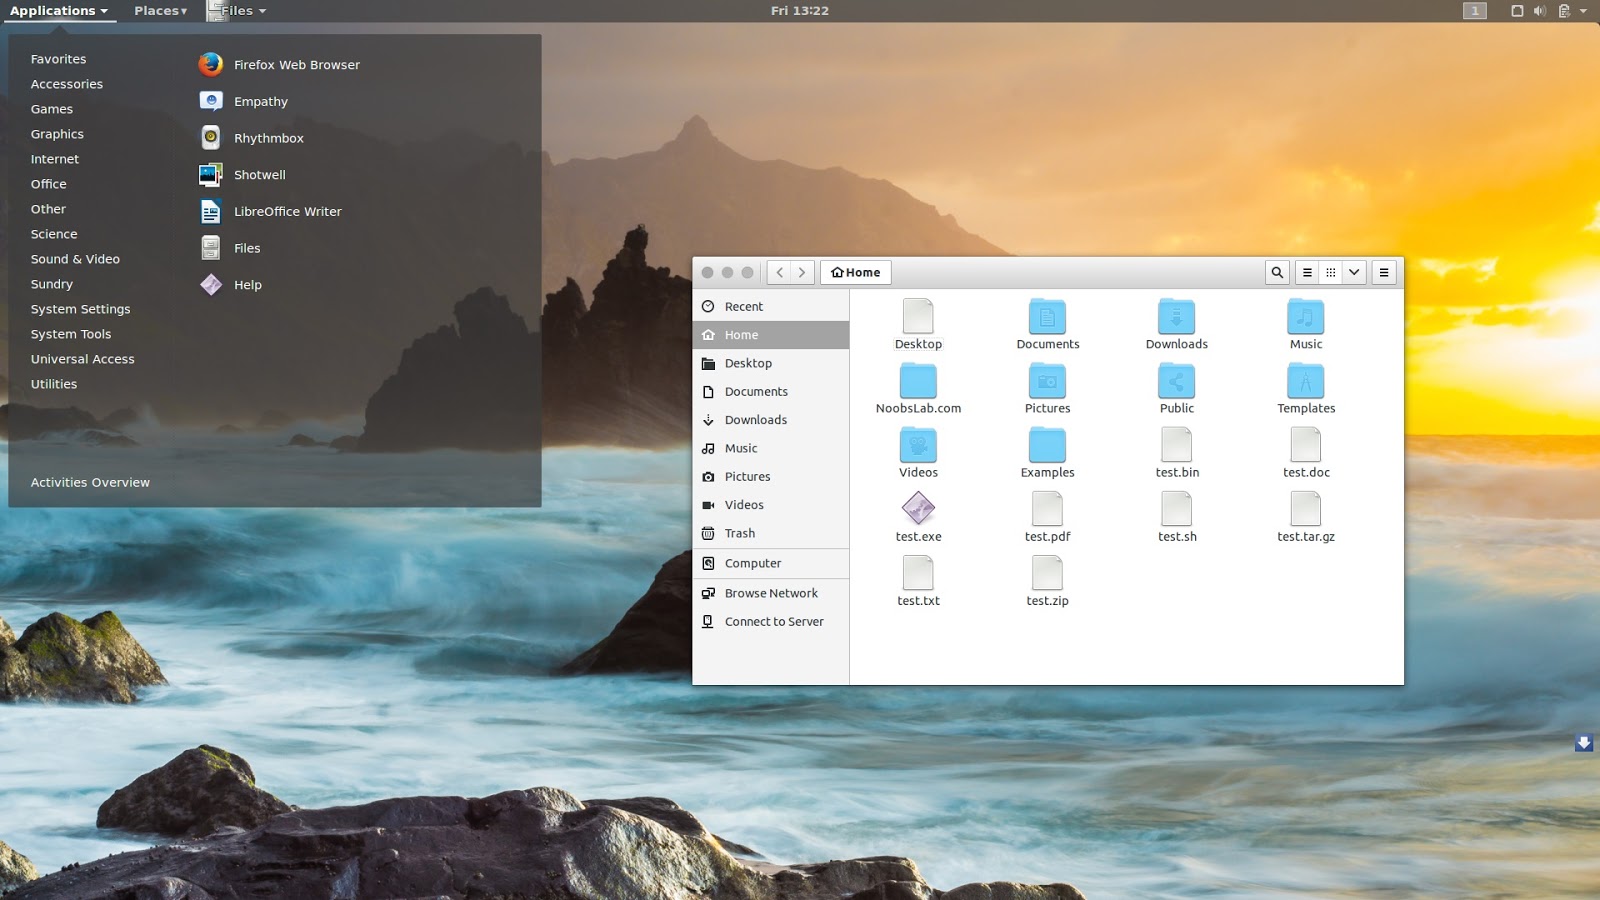 How To Install Themes In Gnome 3.4